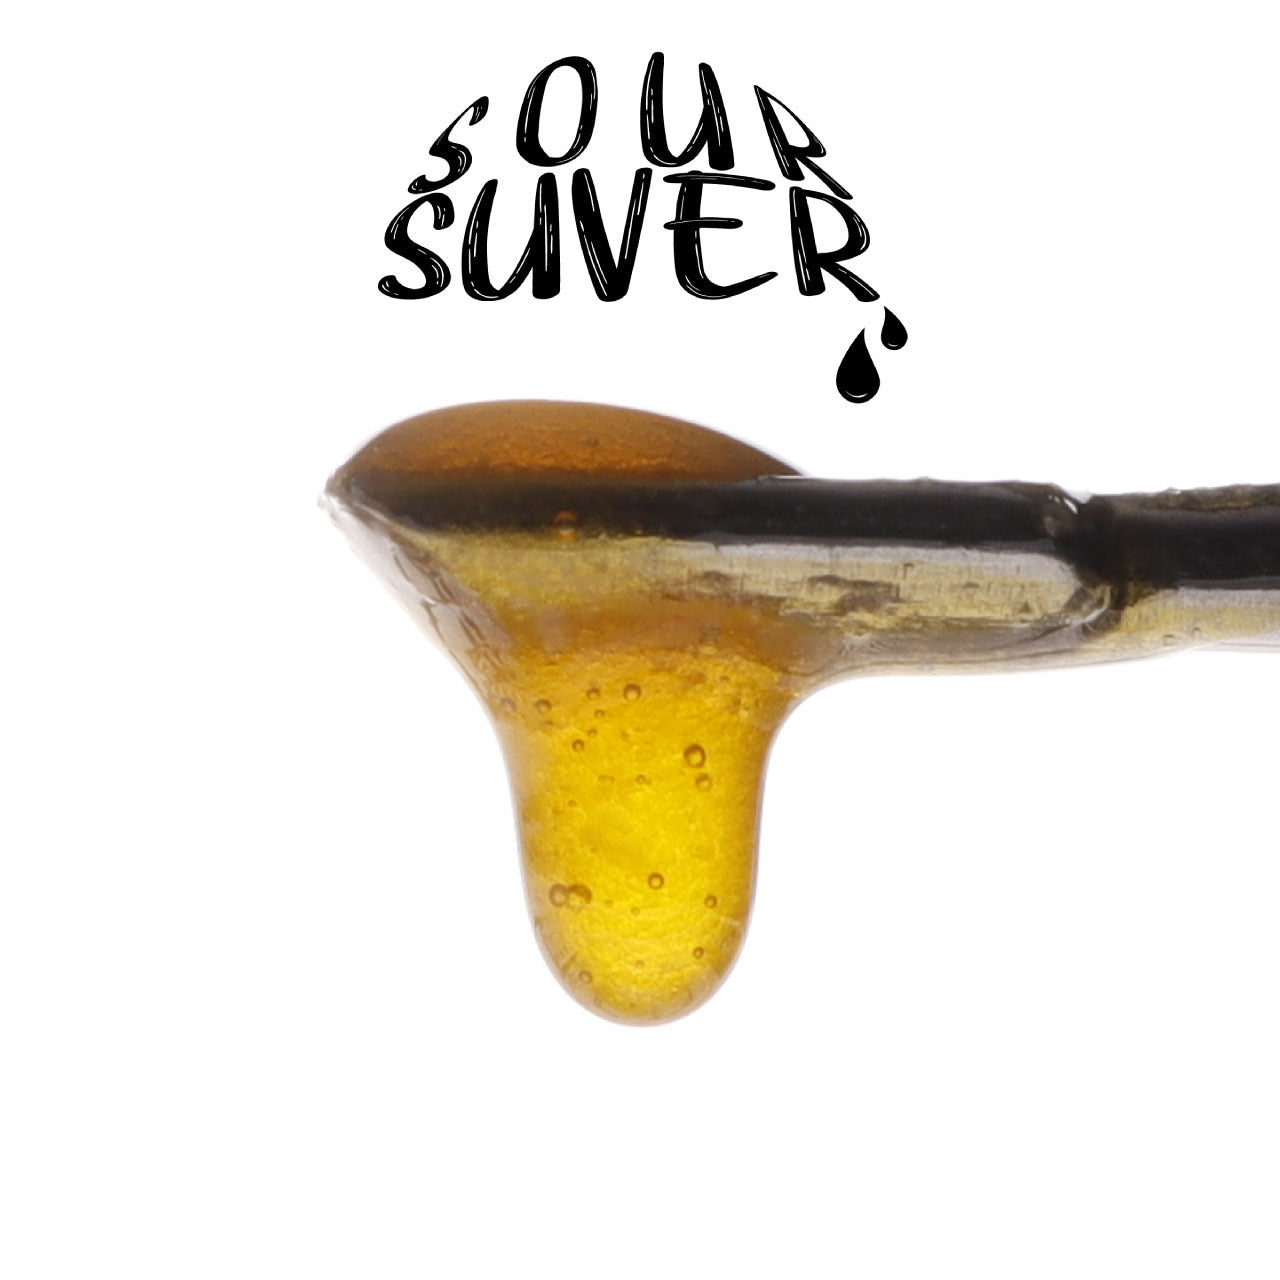 Image of Sour Suver Live Resin on a dab tool